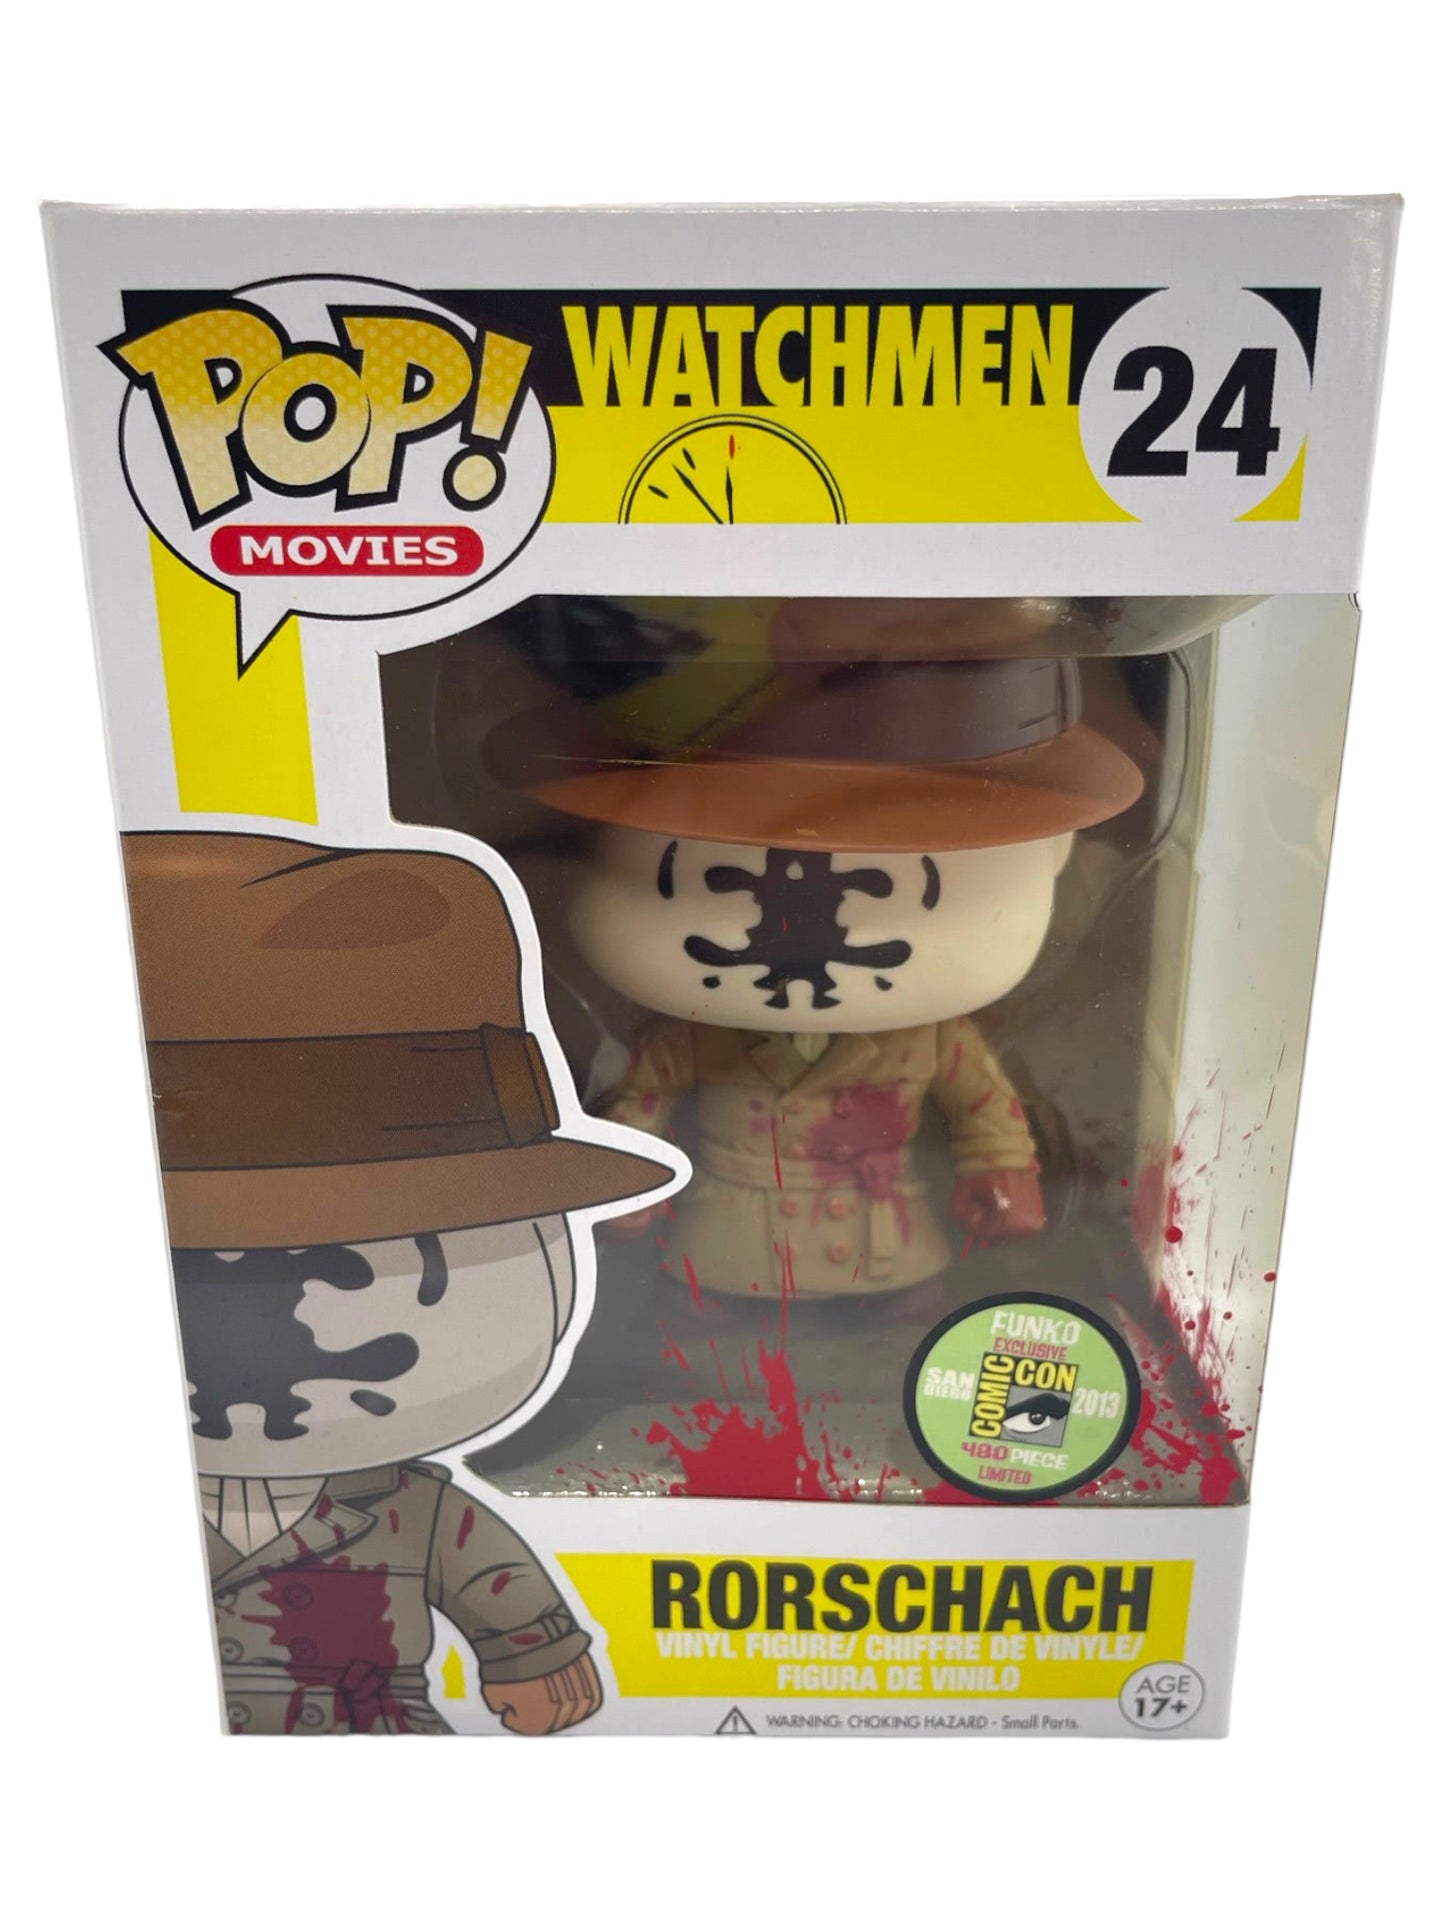 Sold 2013 SDCC Rorschach Bloody 24 LE 480